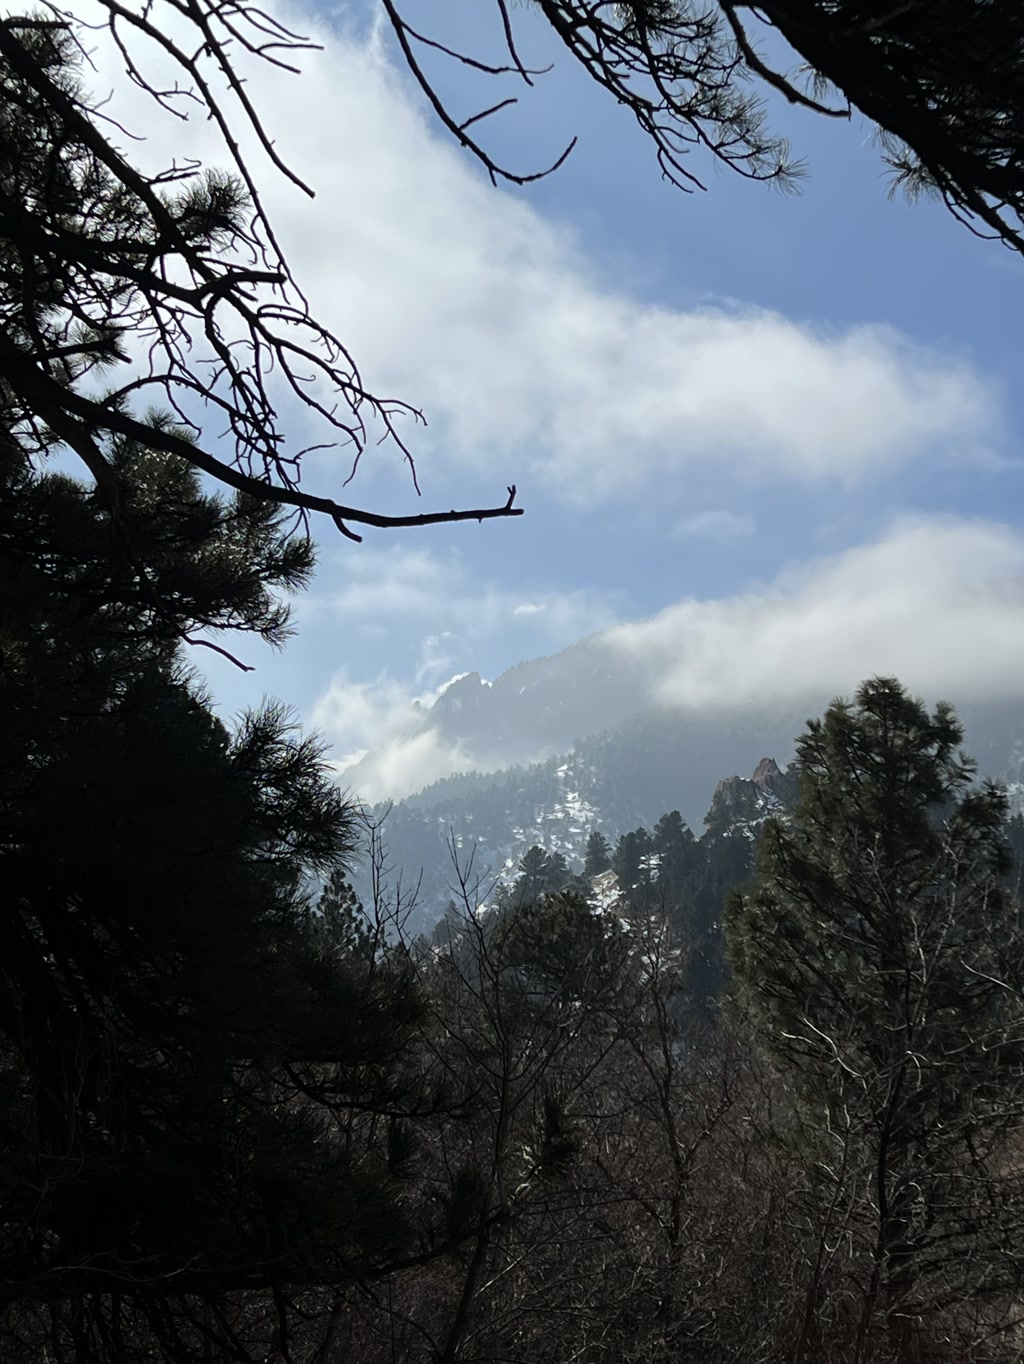 A scenic view through a foreground of dark silhouetted branches of pine trees, overlooking a backdrop of a mountain range partially obscured by a low layer of clouds or mist. The mountain peaks are covered in snow, offering a contrast to the evergreen trees dotting the slopes. The sky is bright with patches of blue and scattered white clouds, suggesting a cool or cold but relatively clear day.